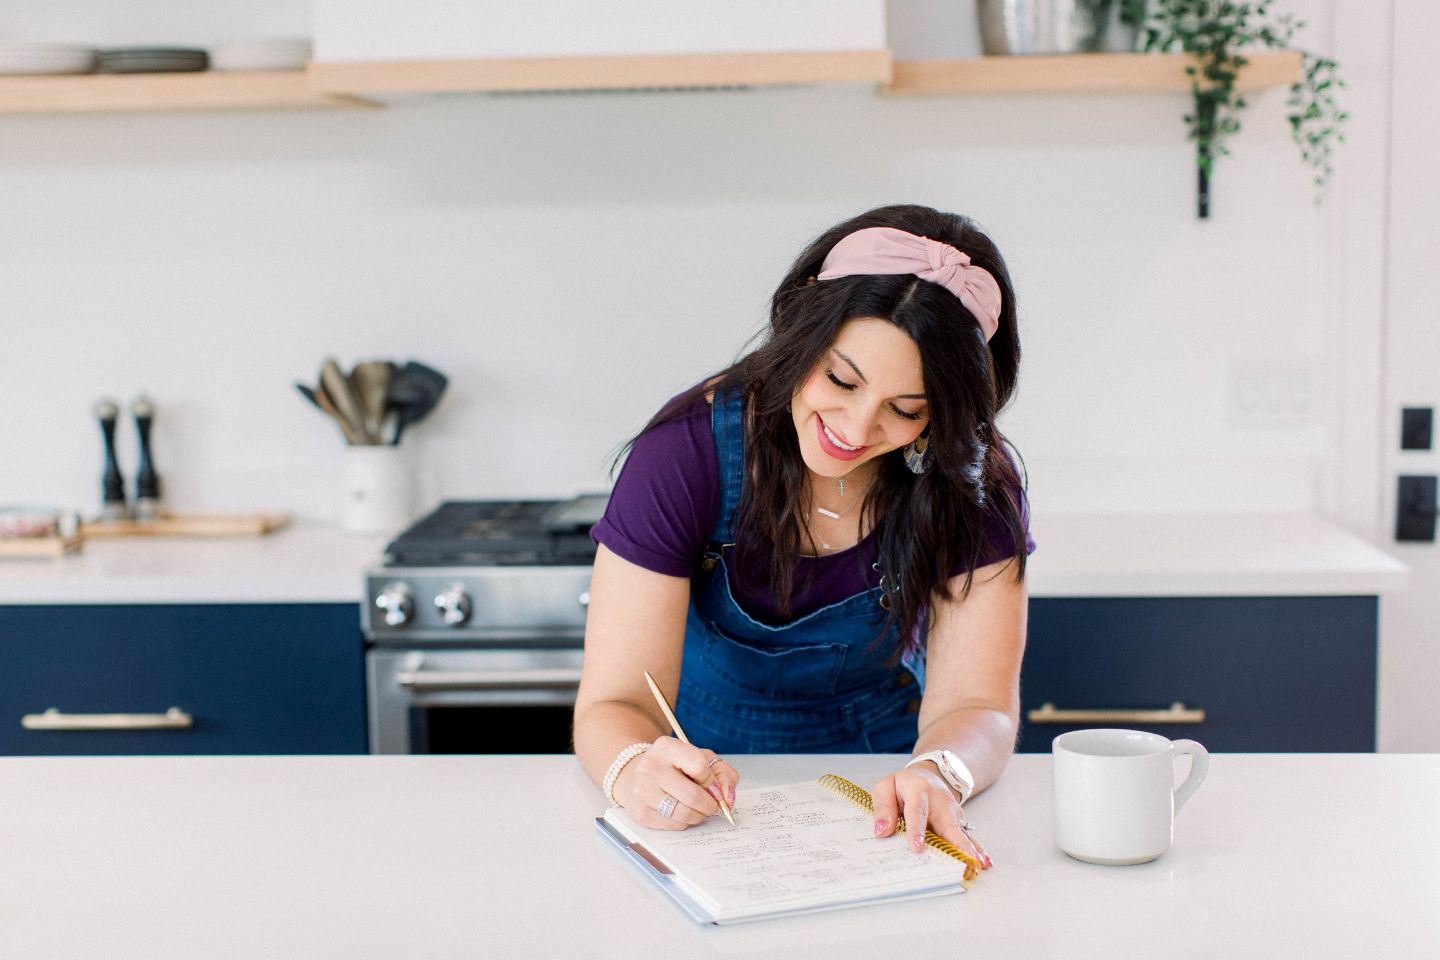 Dark haired woman working at kitchen island, writing in a notebook, coffee next to her